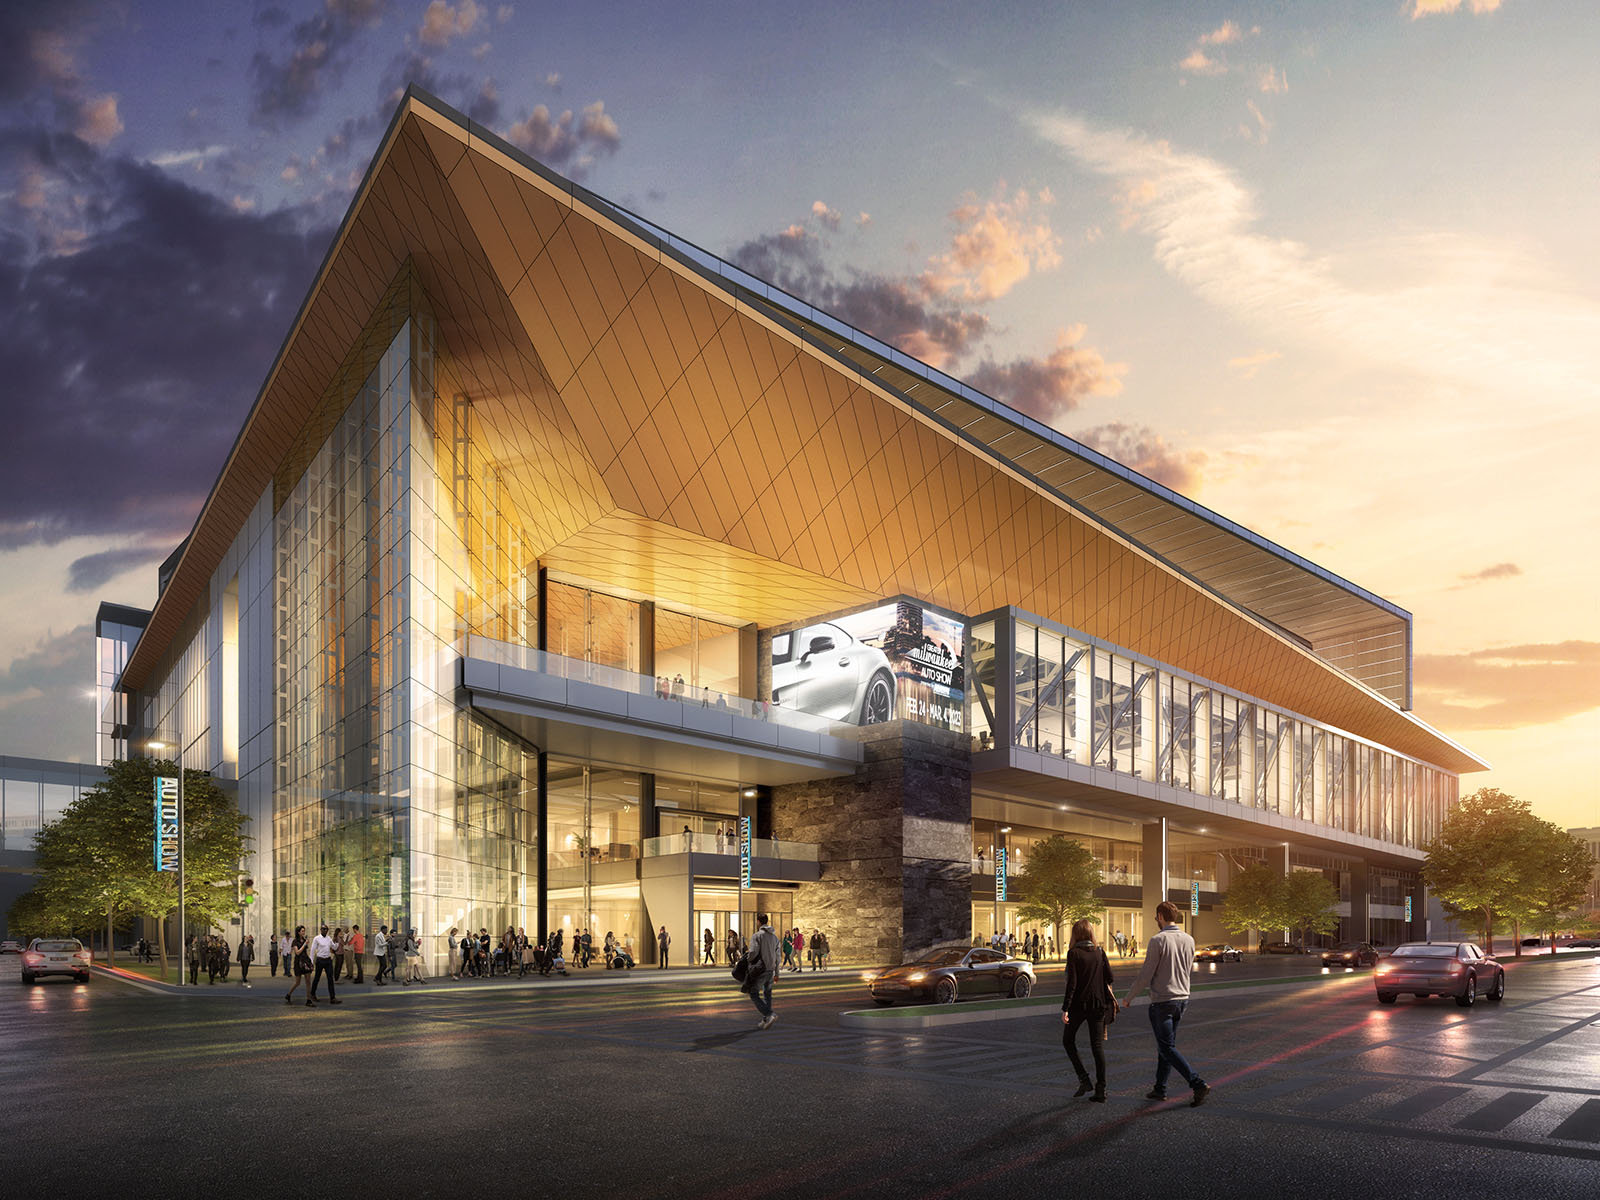 Convention center addition designs revealed & they're exciting OnMilwaukee